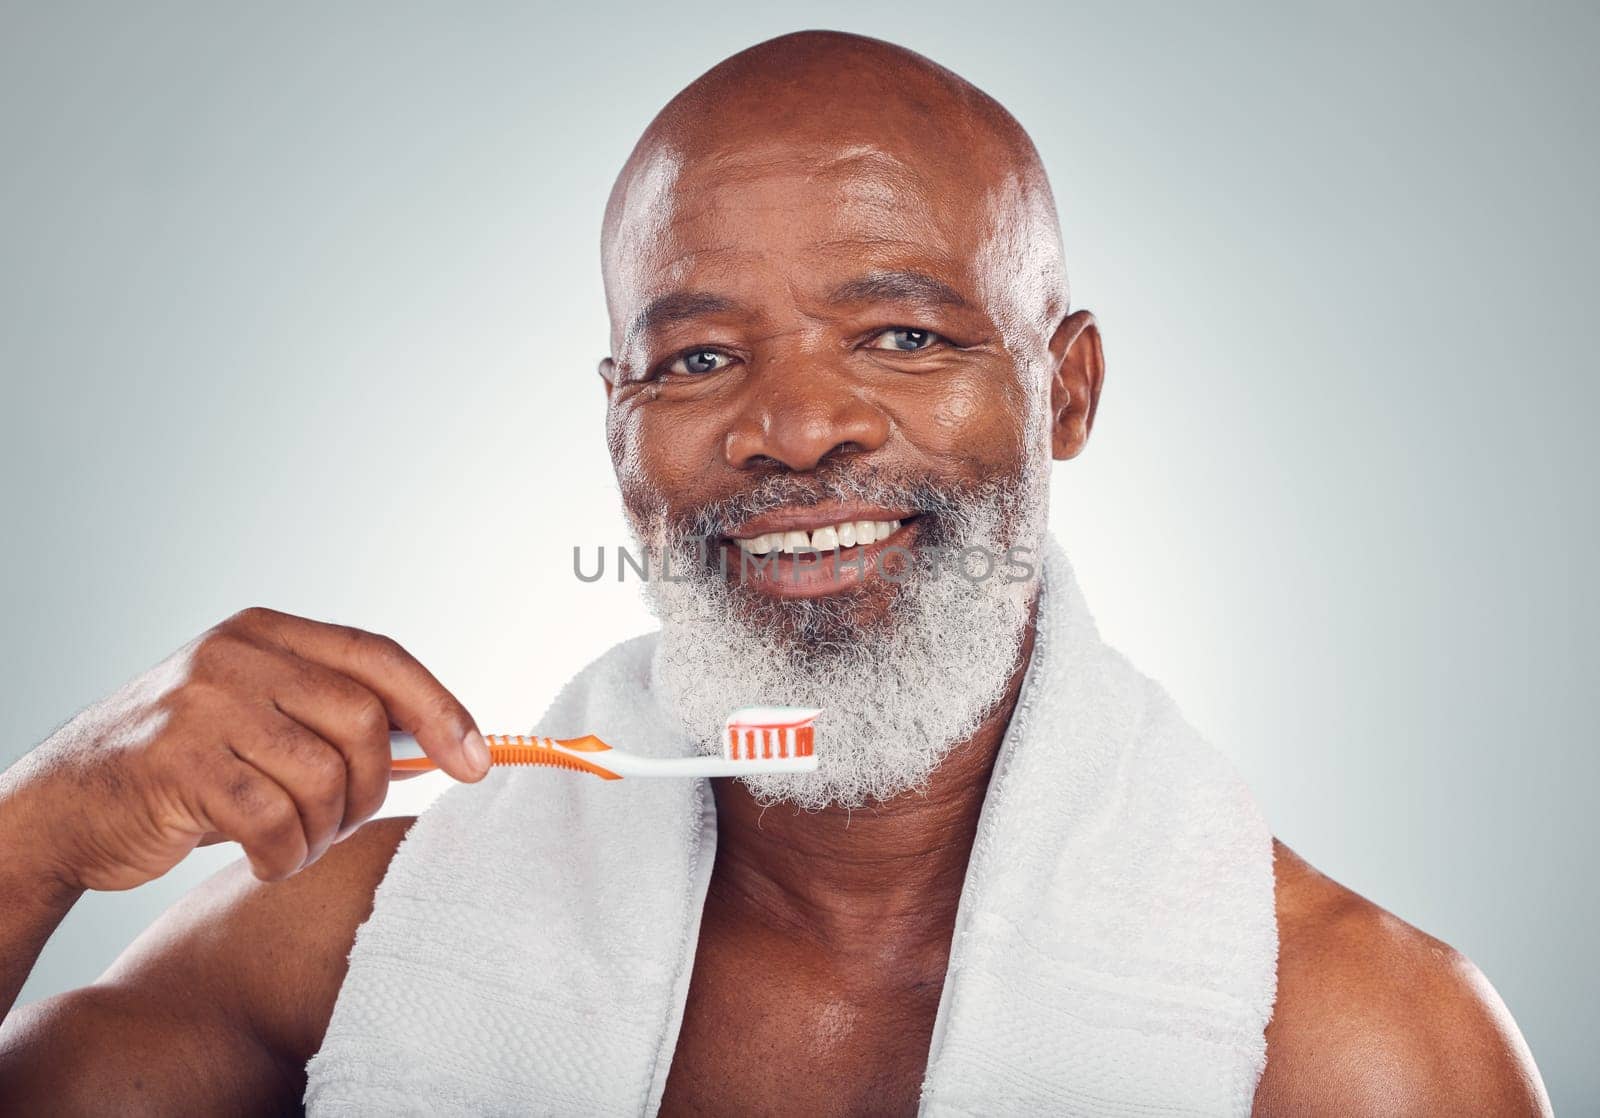 Black man brushing teeth, smile and toothbrush, mouth care and fresh breath, hygiene isolated on studio background. Health, wellness and cleaning with dental portrait, senior person and retirement.